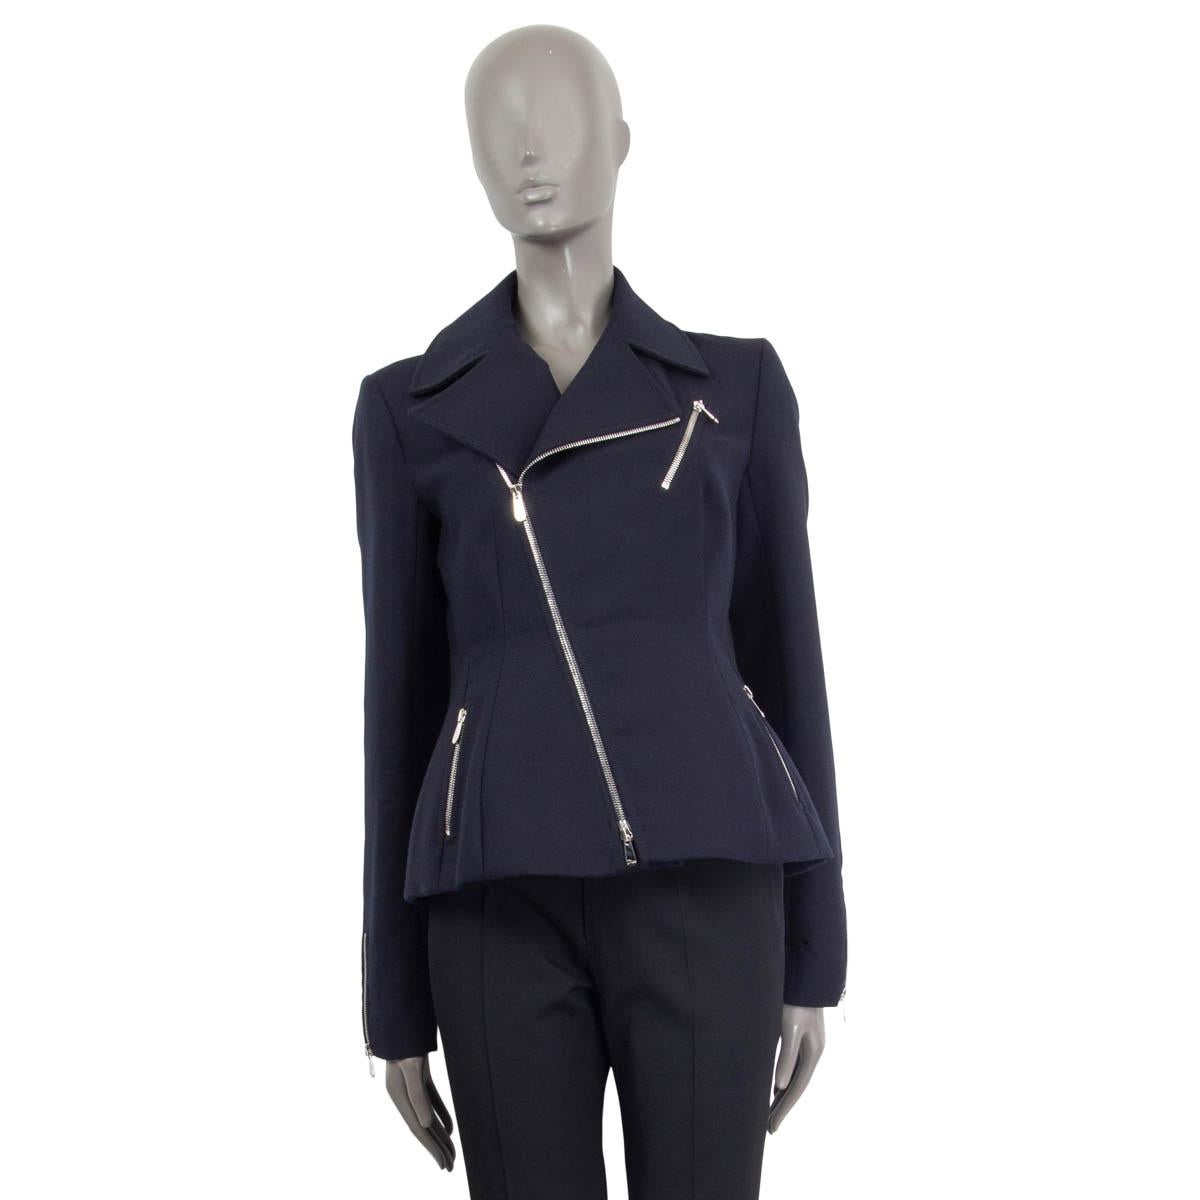 100% authentic Christian Dior tailored biker jacket in navy blue wool (100%). Comes with a notch collar, zipped cuffs and three silver zip pockets on the front. Opens with a diagonal silver metal zipper on the front. Lined in silk (100%). Has been